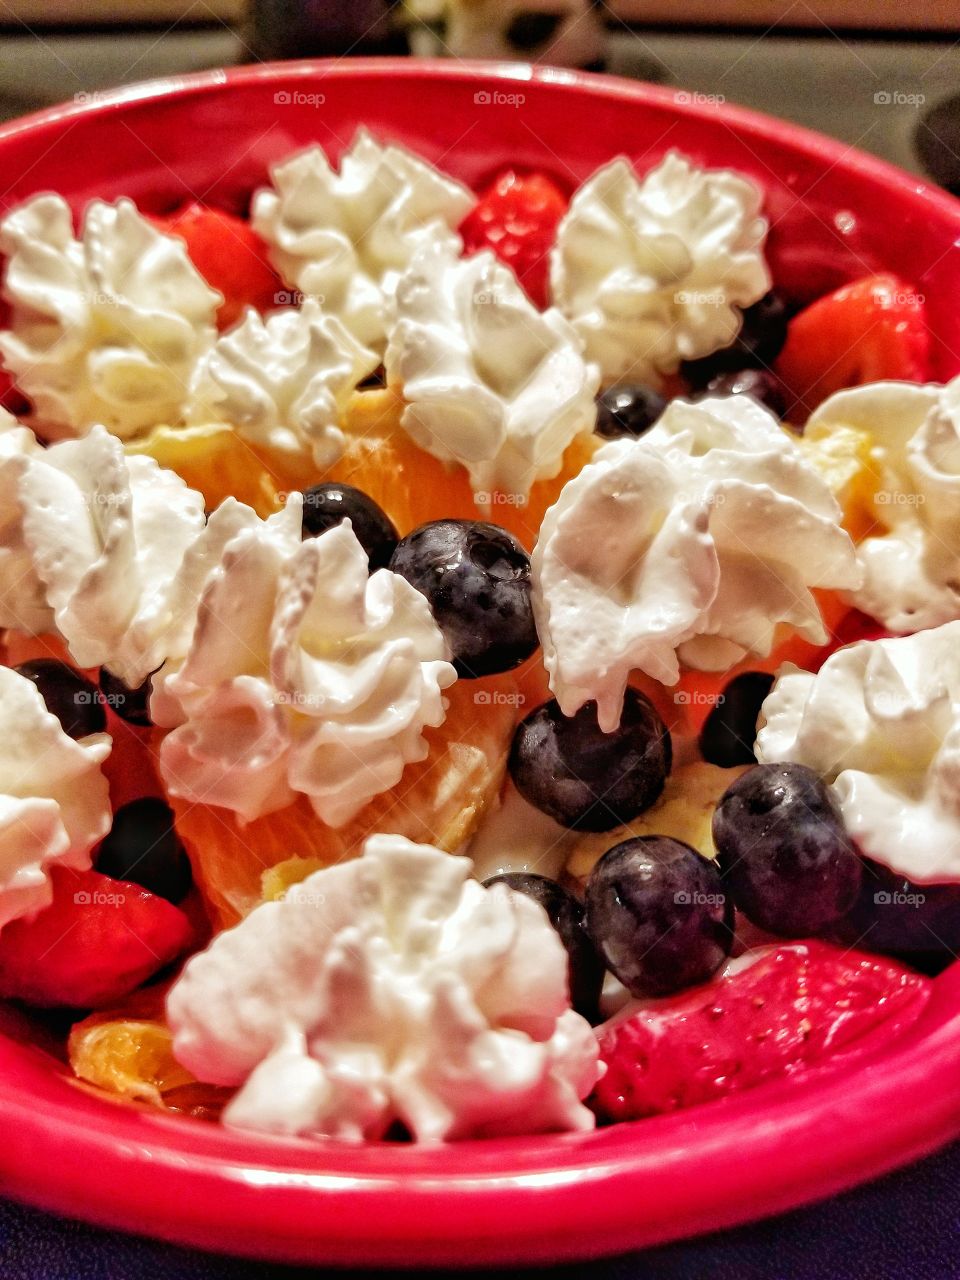 Berries and Oranges in a bowl for a healthy dessert everyone can love!